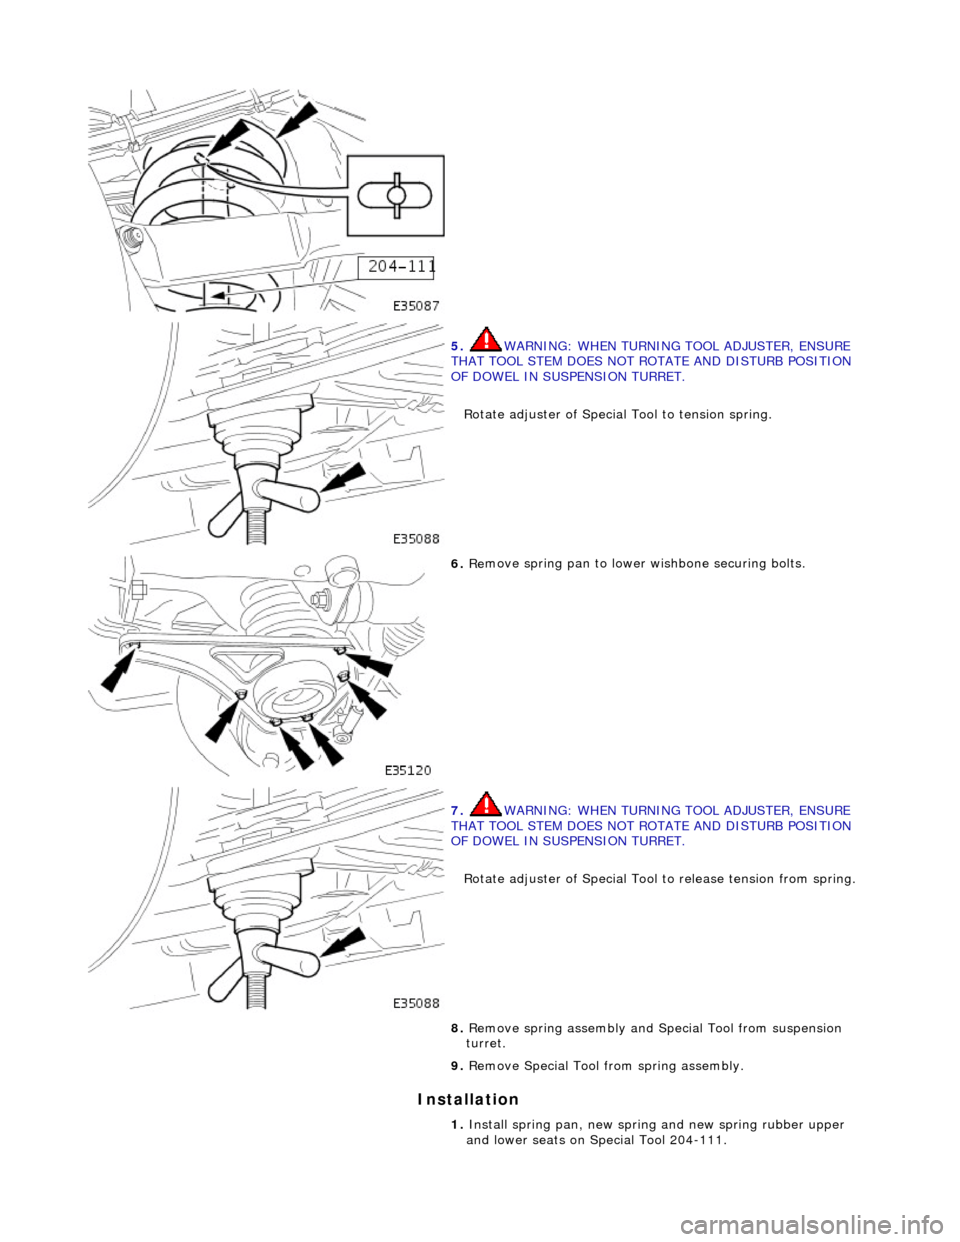 JAGUAR X308 1998 2.G Workshop Manual In
 stallation 
 
 
5. 
WA
 RNING: WHEN TURNING TOOL ADJUSTER, ENSURE 
THAT TOOL STEM DOES NOT ROTATE AND DISTURB POSITION 
OF DOWEL IN SUSPENSION TURRET. 
Rotate adjuster of Special Tool to tension s